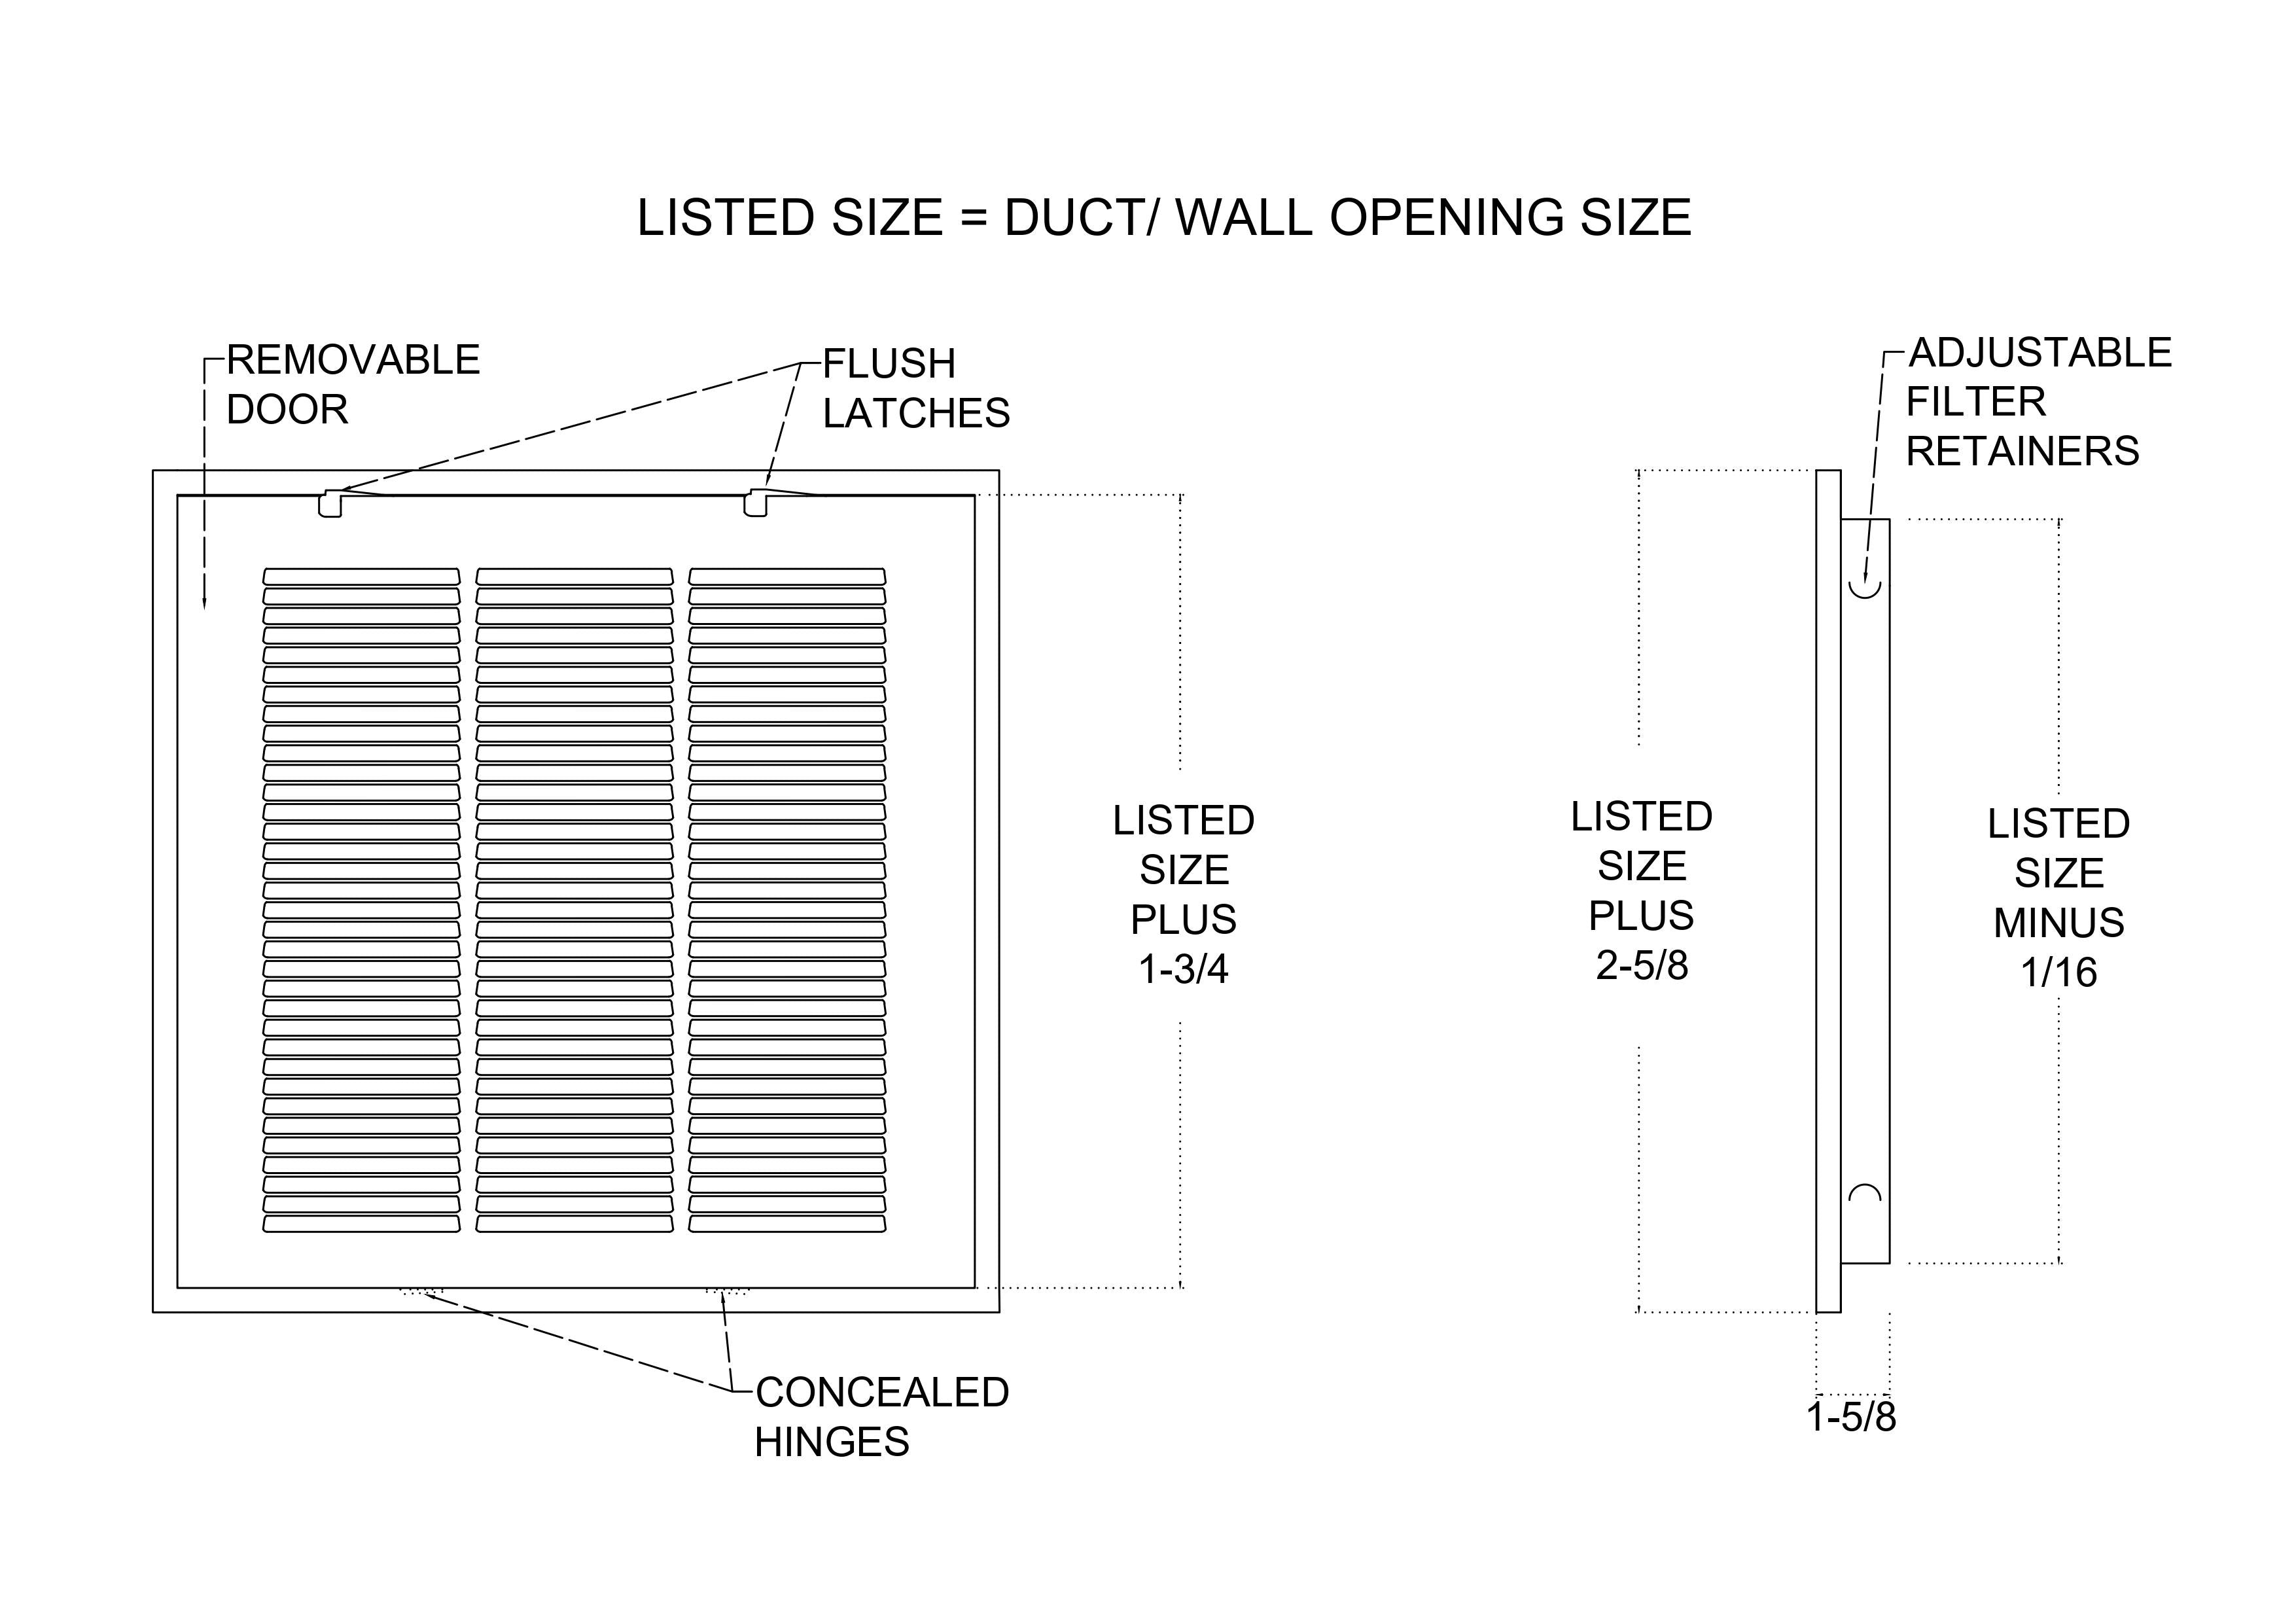 20" X 20" Duct Opening | Filter Included HD Steel Return Air Filter Grille for Sidewall and Ceiling